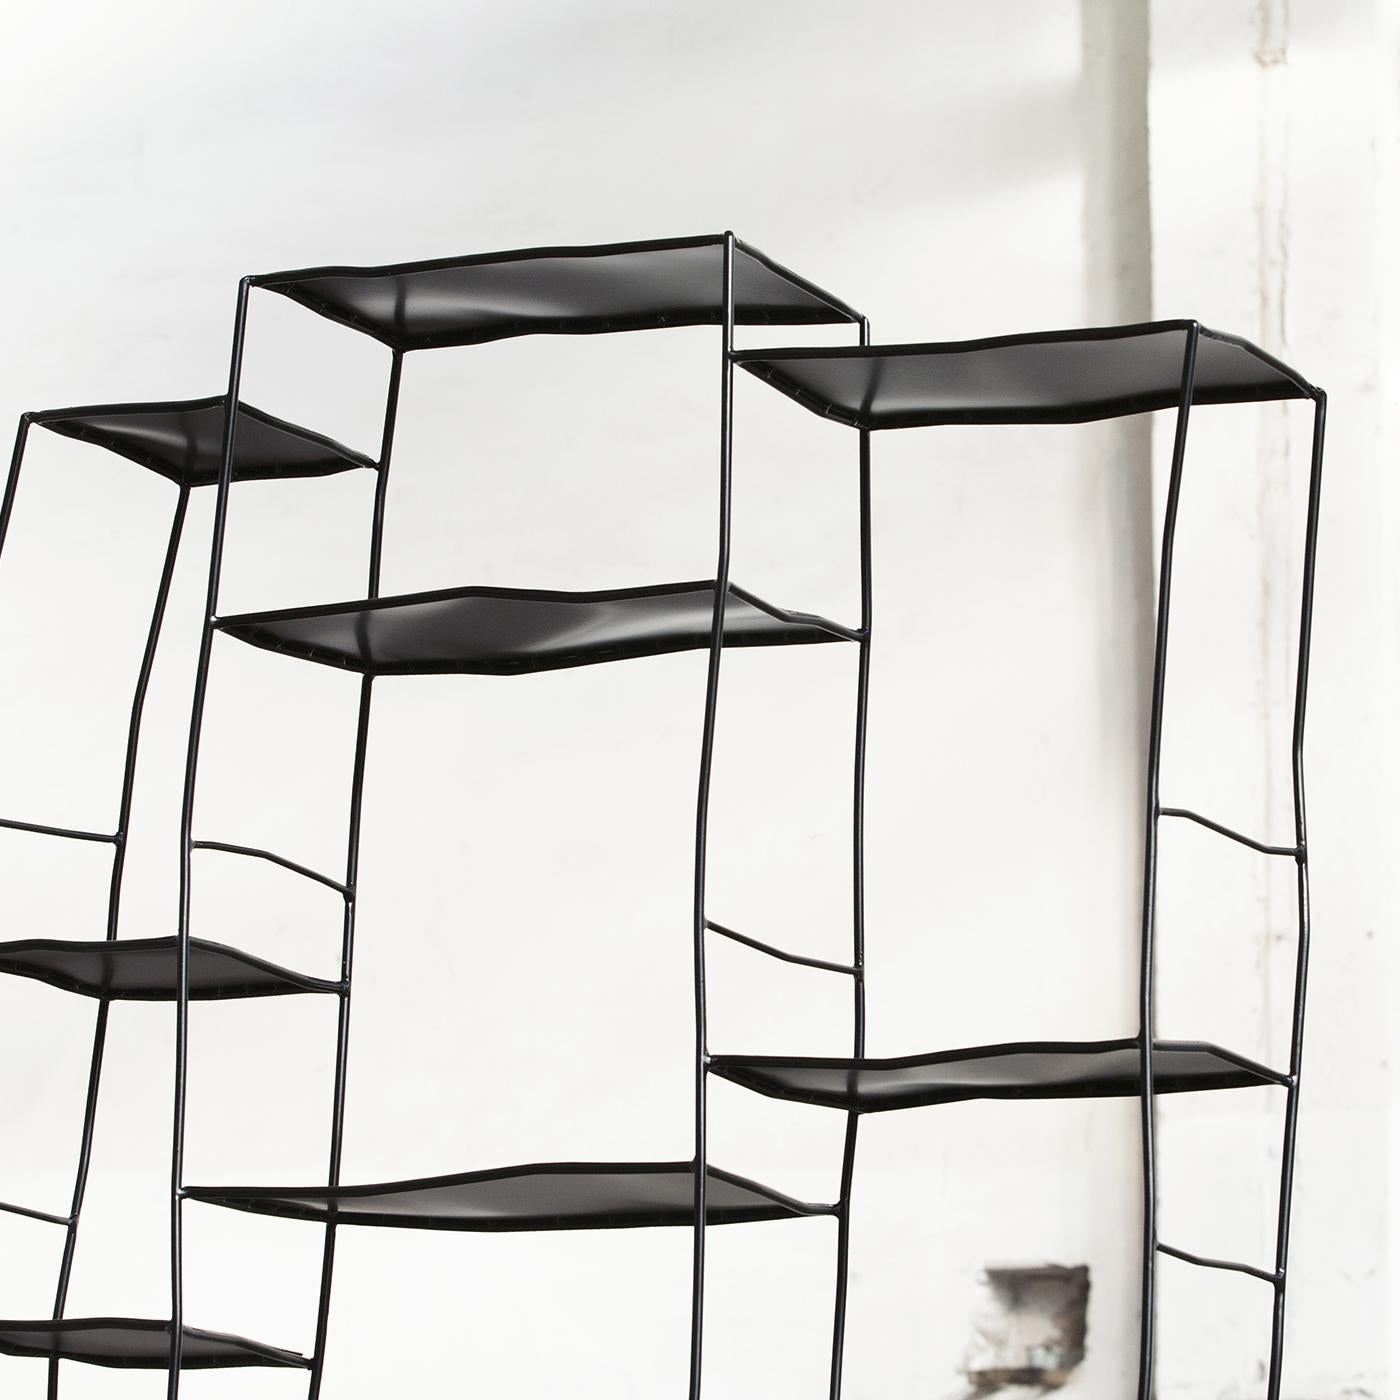 The S_Bookshelf is the perfect addition to a large luminous loft. With its delicate and organic shapes, it divides spaces without sacrificing elegance and style. This unique piece is entirely made of handwrought iron, and the sketch-like design is